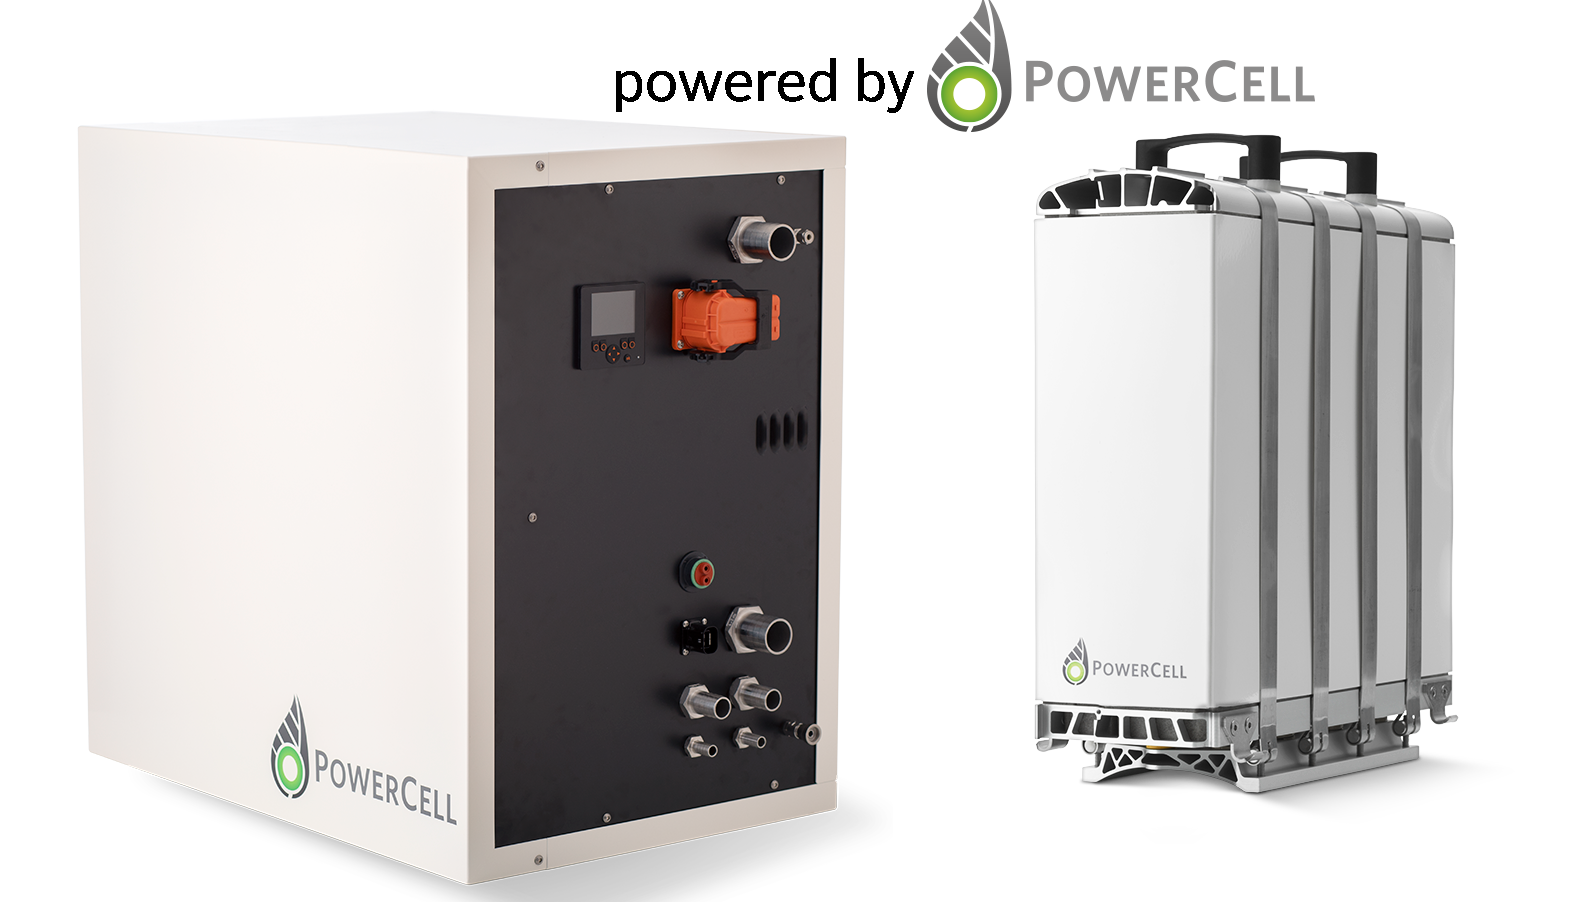 M100 2BS3 PowerCell Units 3